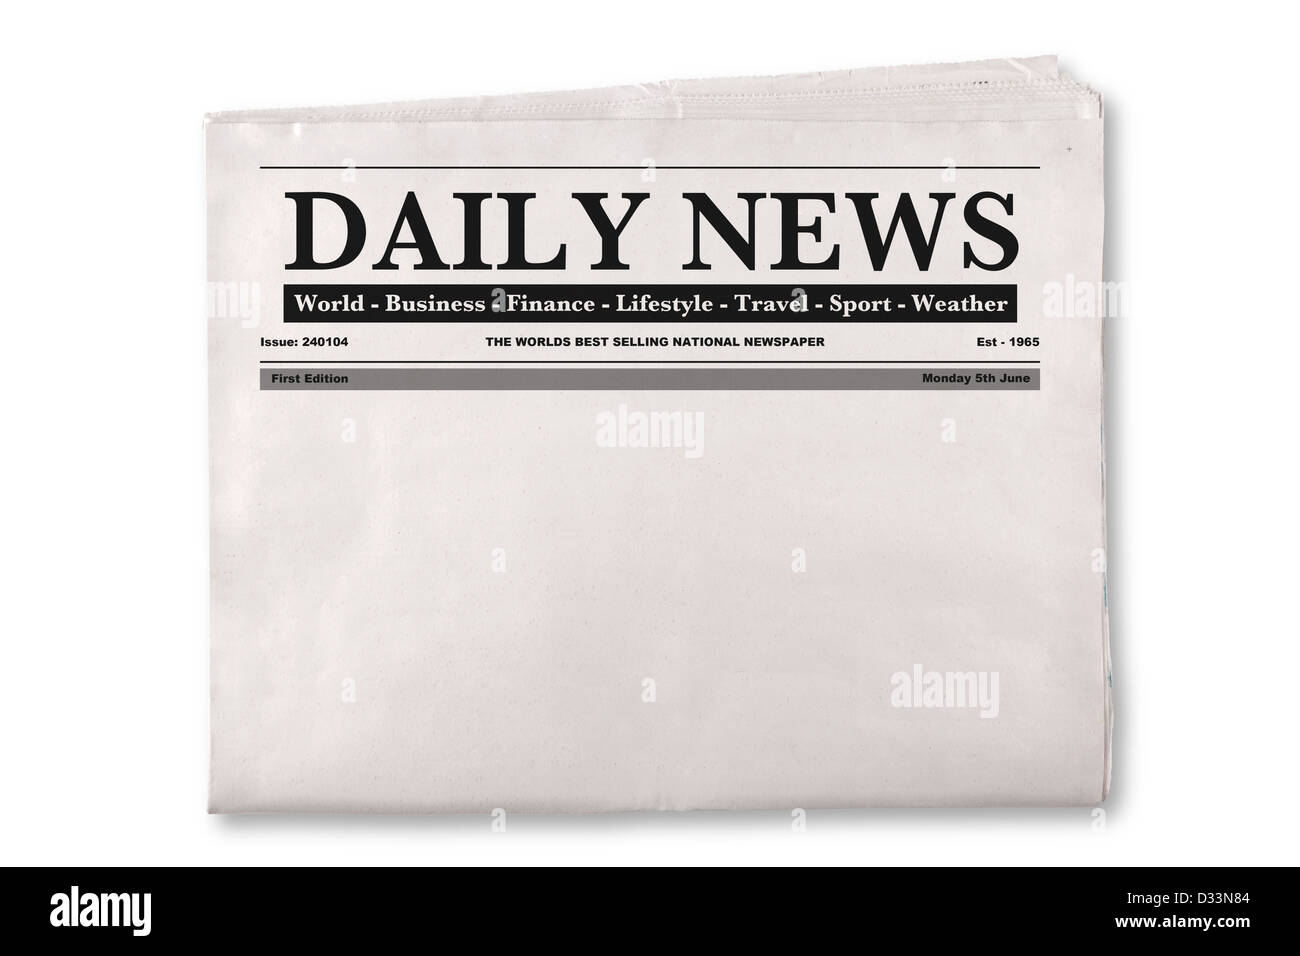 Mock up of a blank Daily Newspaper with empty space to add your own news or headline text and pictures. Stock Photo